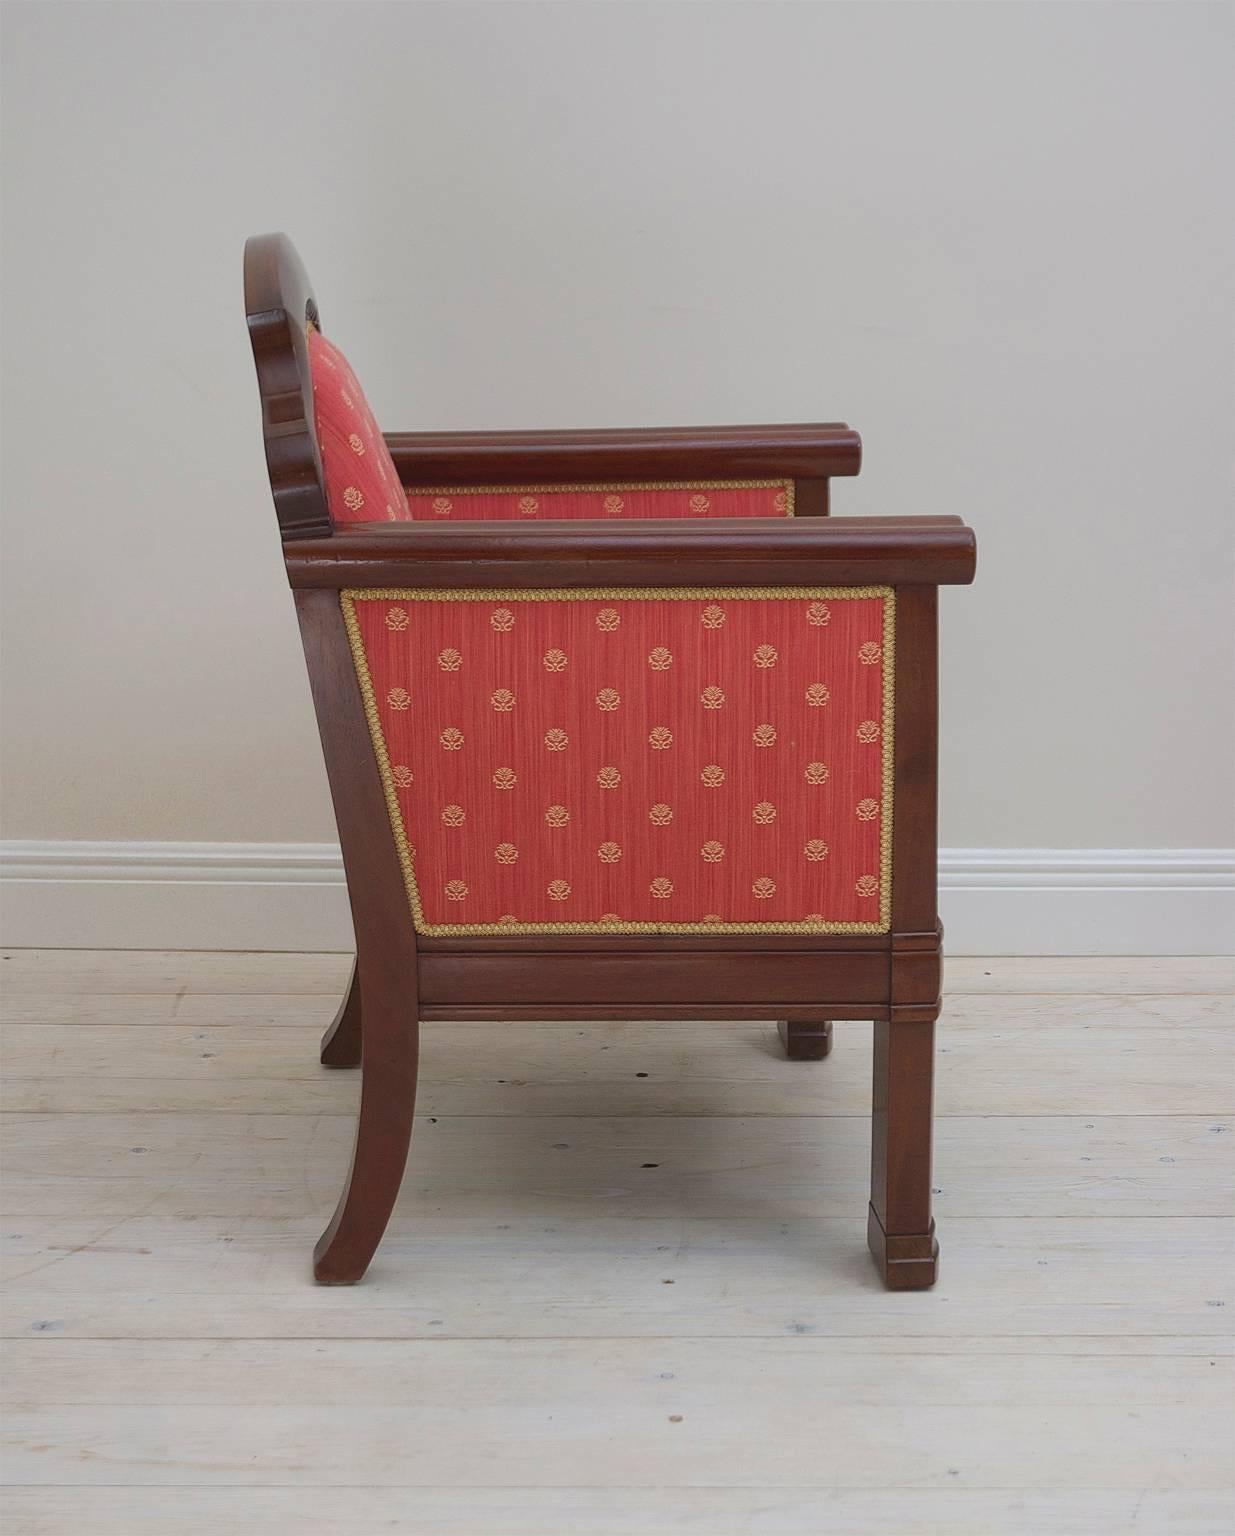 Polished Pair of Danish Art Deco Club Chairs/ Bergeres in Mahogany w/ Upholstery, c. 1920 For Sale